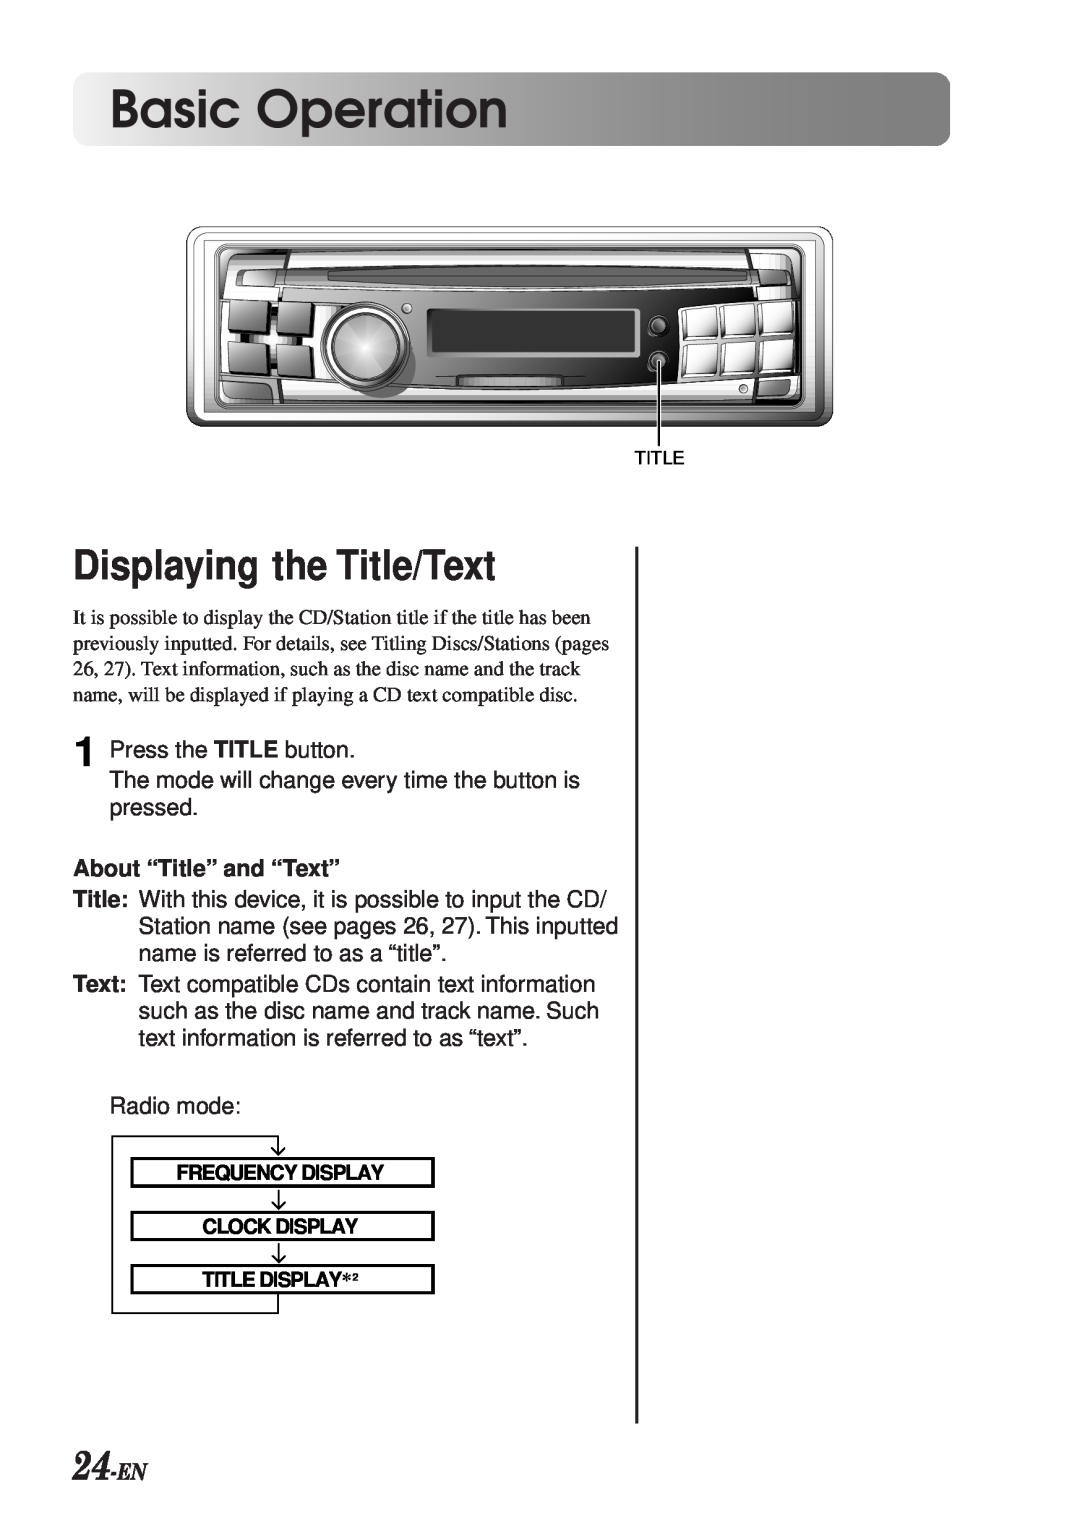 Alpine CDA-7990 manual Displaying the Title/Text, 24-EN, About “Title” and “Text”, Basic Operation 